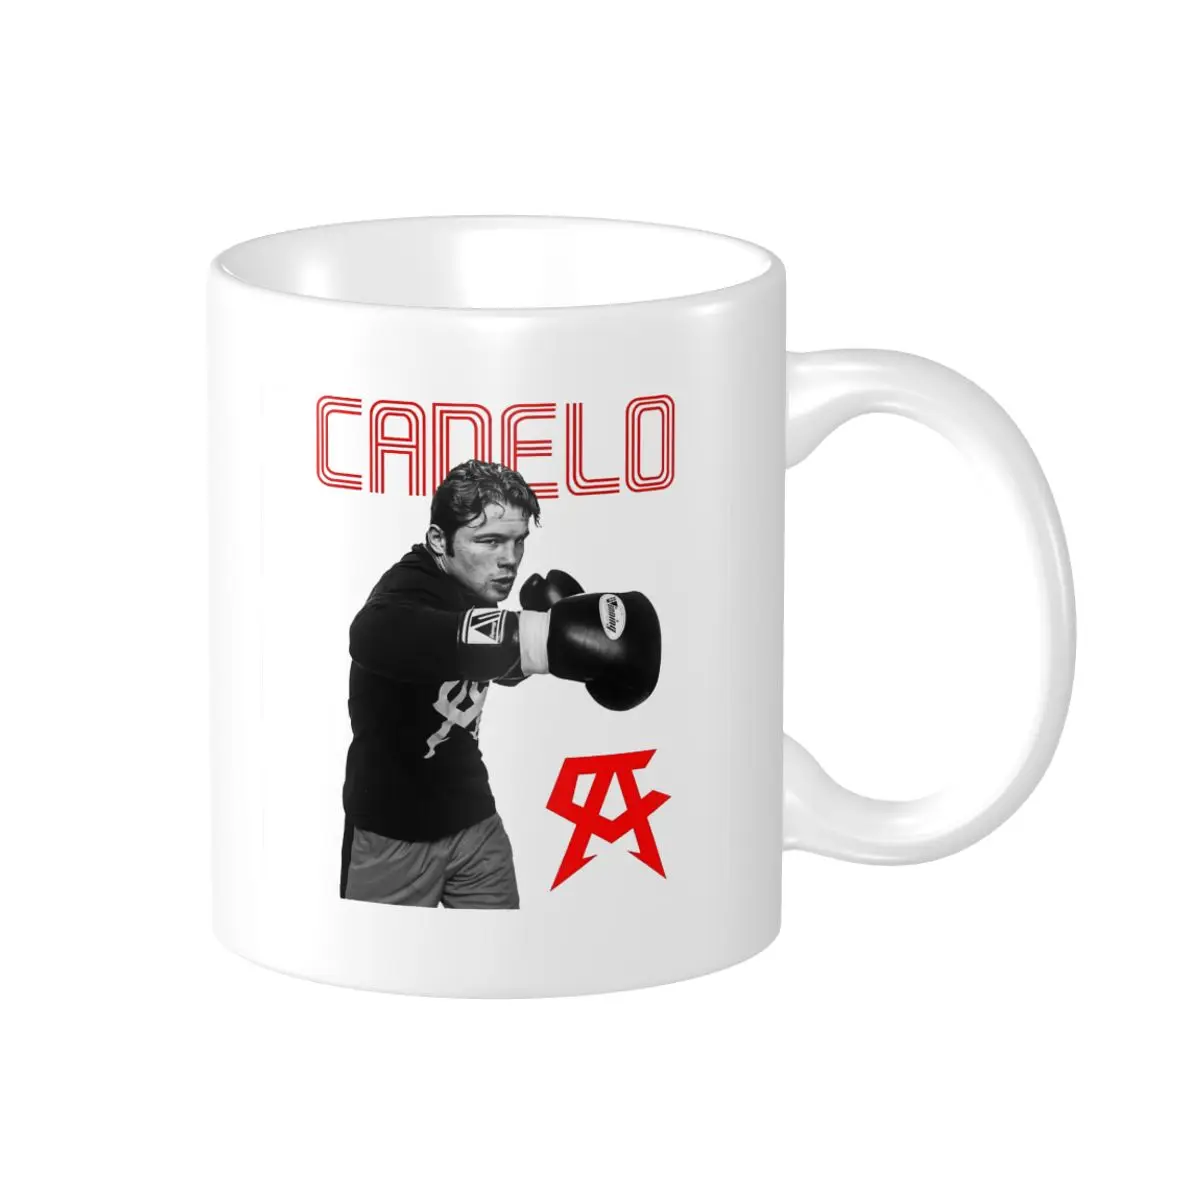 

Promo Saul Canelos Alvarez Mexico Boxing T Shirt Graphic Mugs Top Quality Cups CUPS Print Funny Novelty R257 milk cups